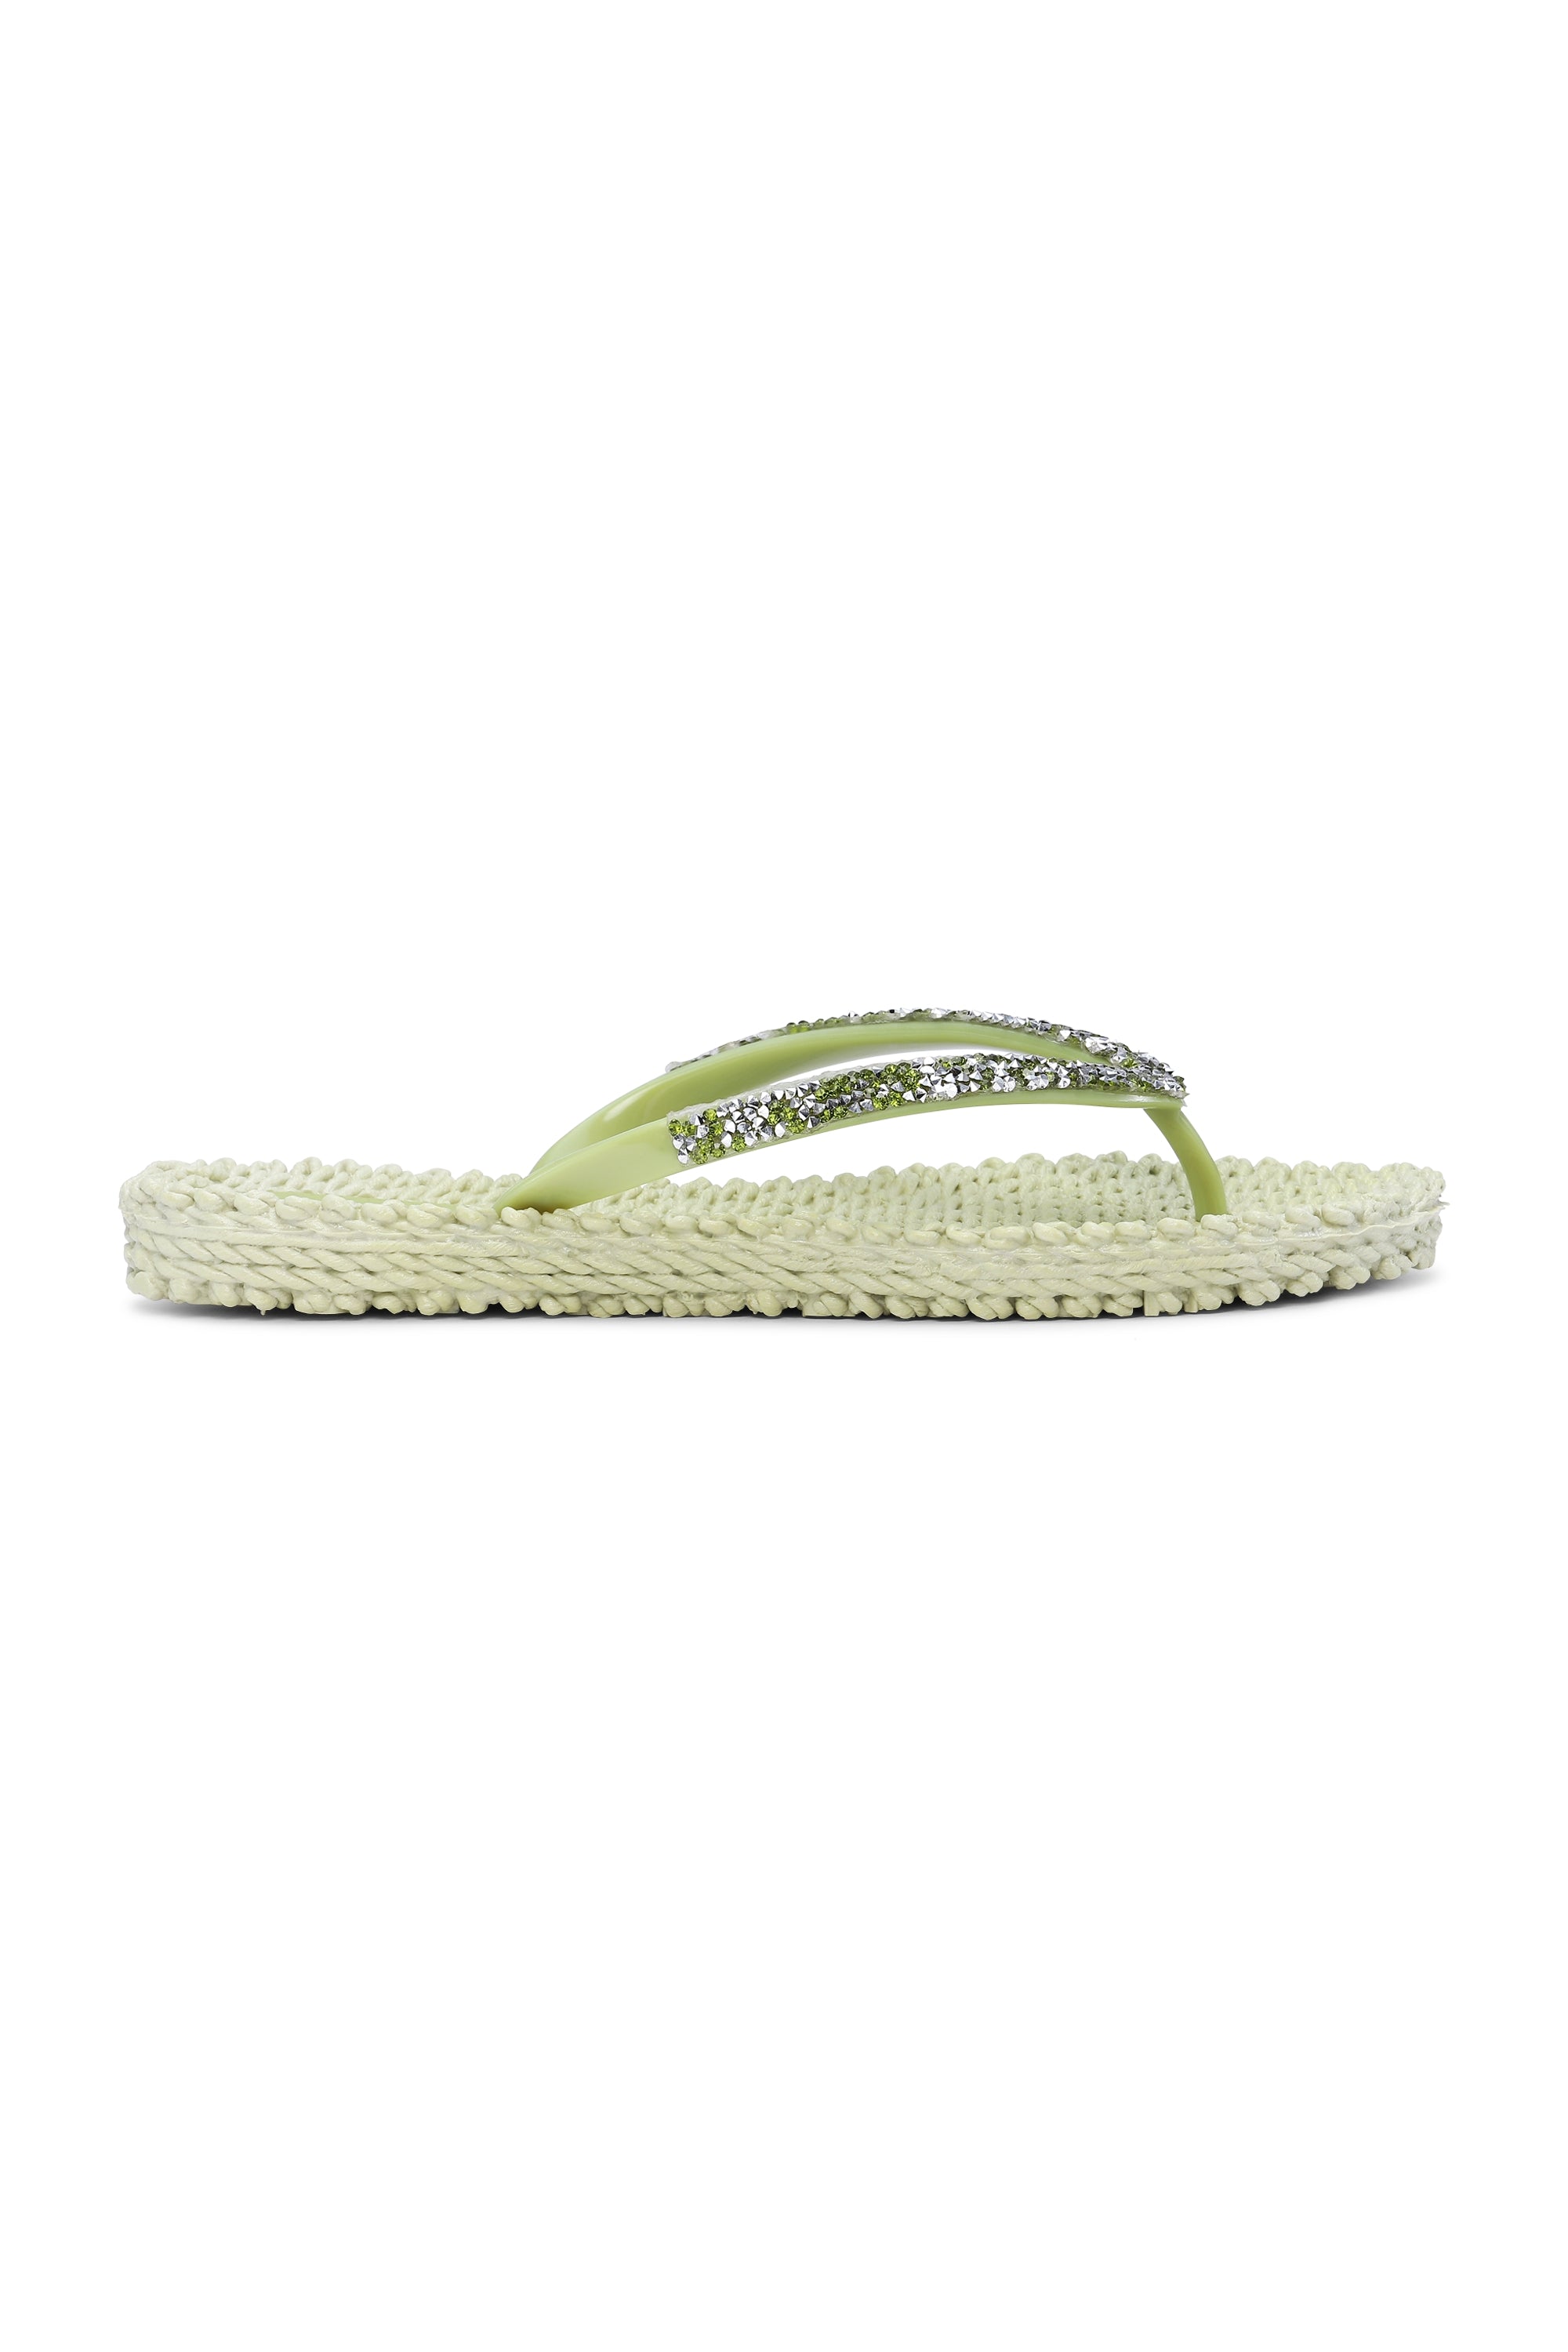 Flip Flop in color light green with glitter strips by Ilse Jacobsen